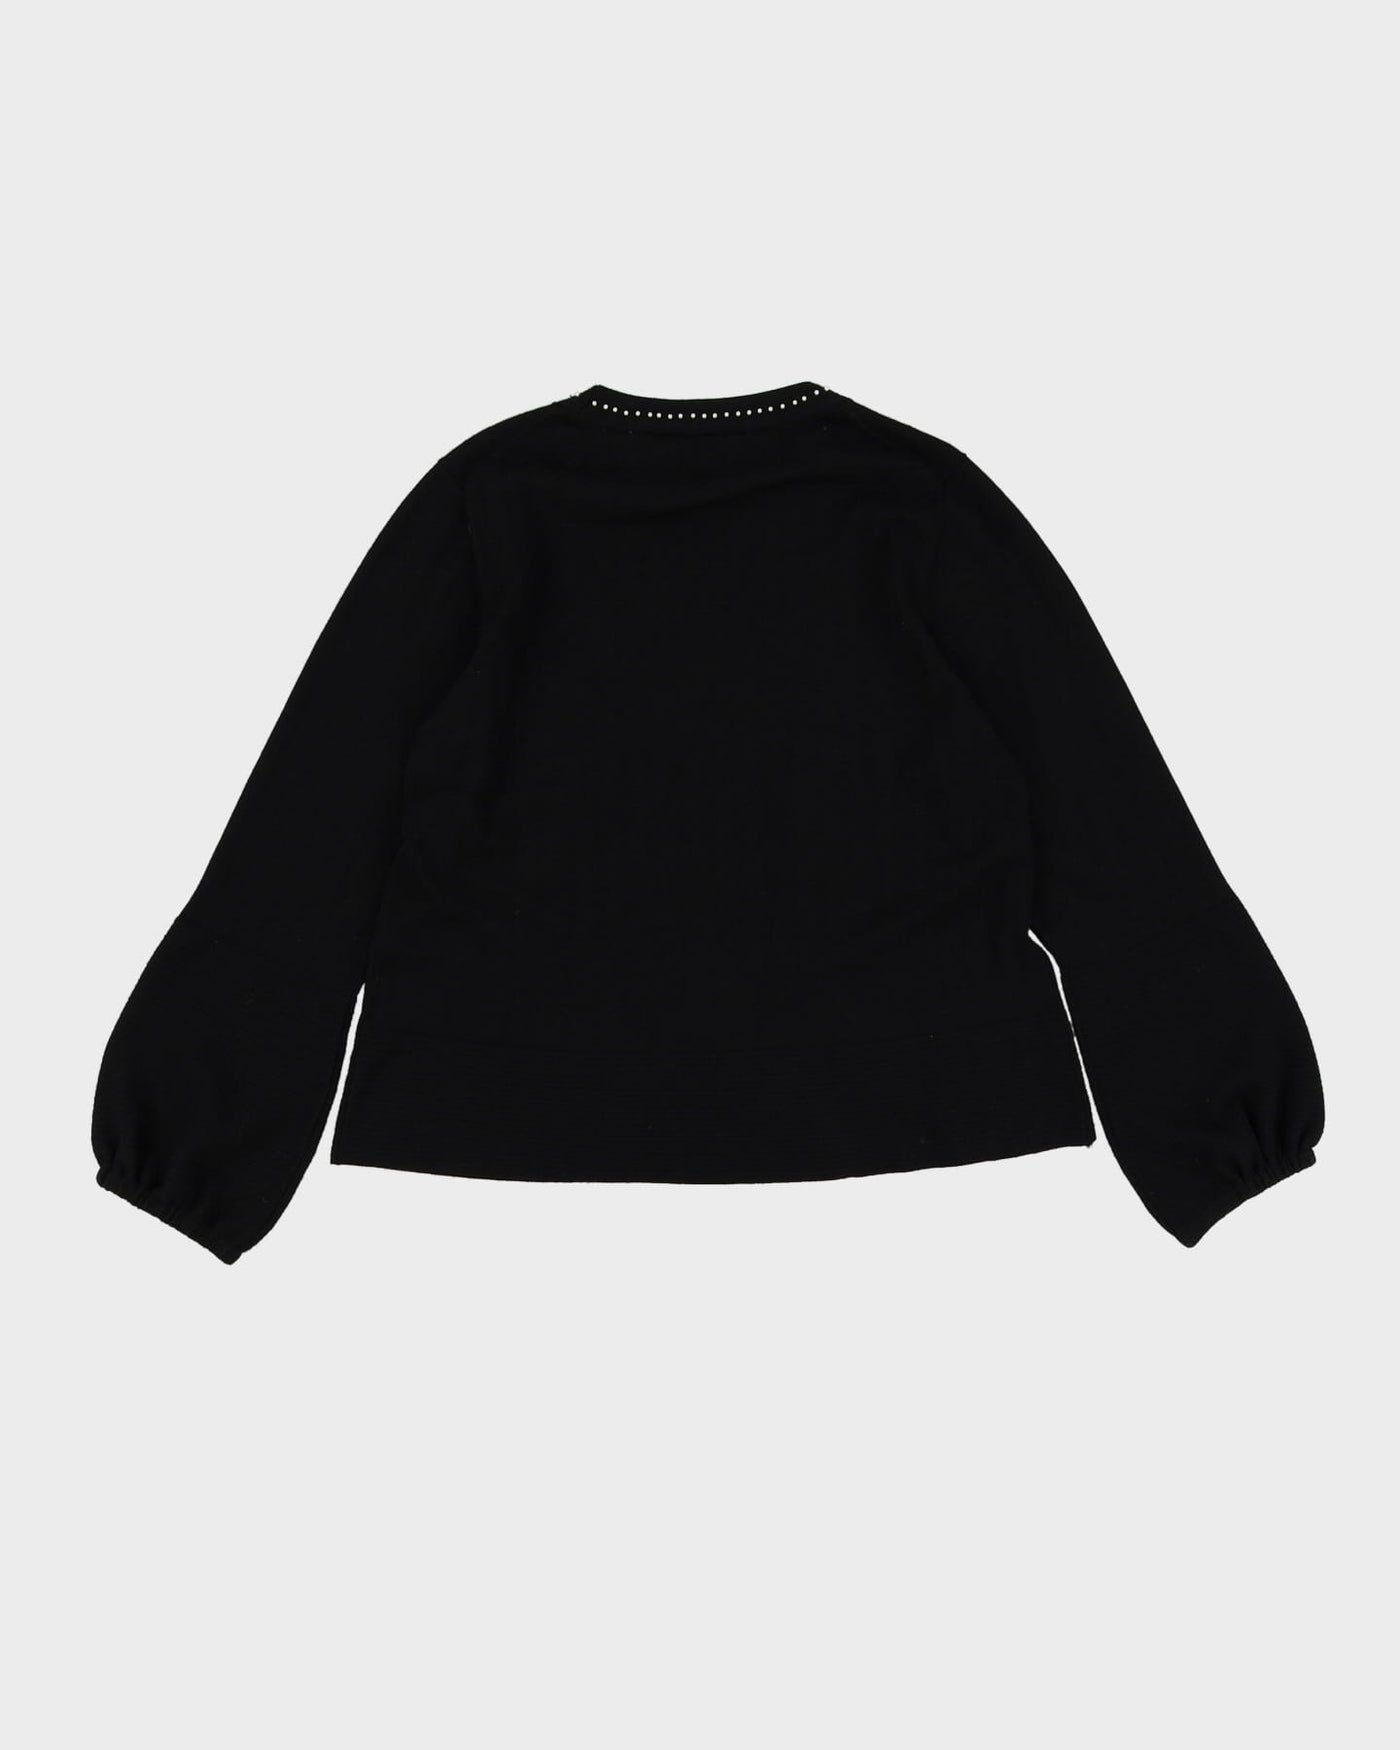 Karl Lagerfeld Black With Pearls Knitted Jumper - M